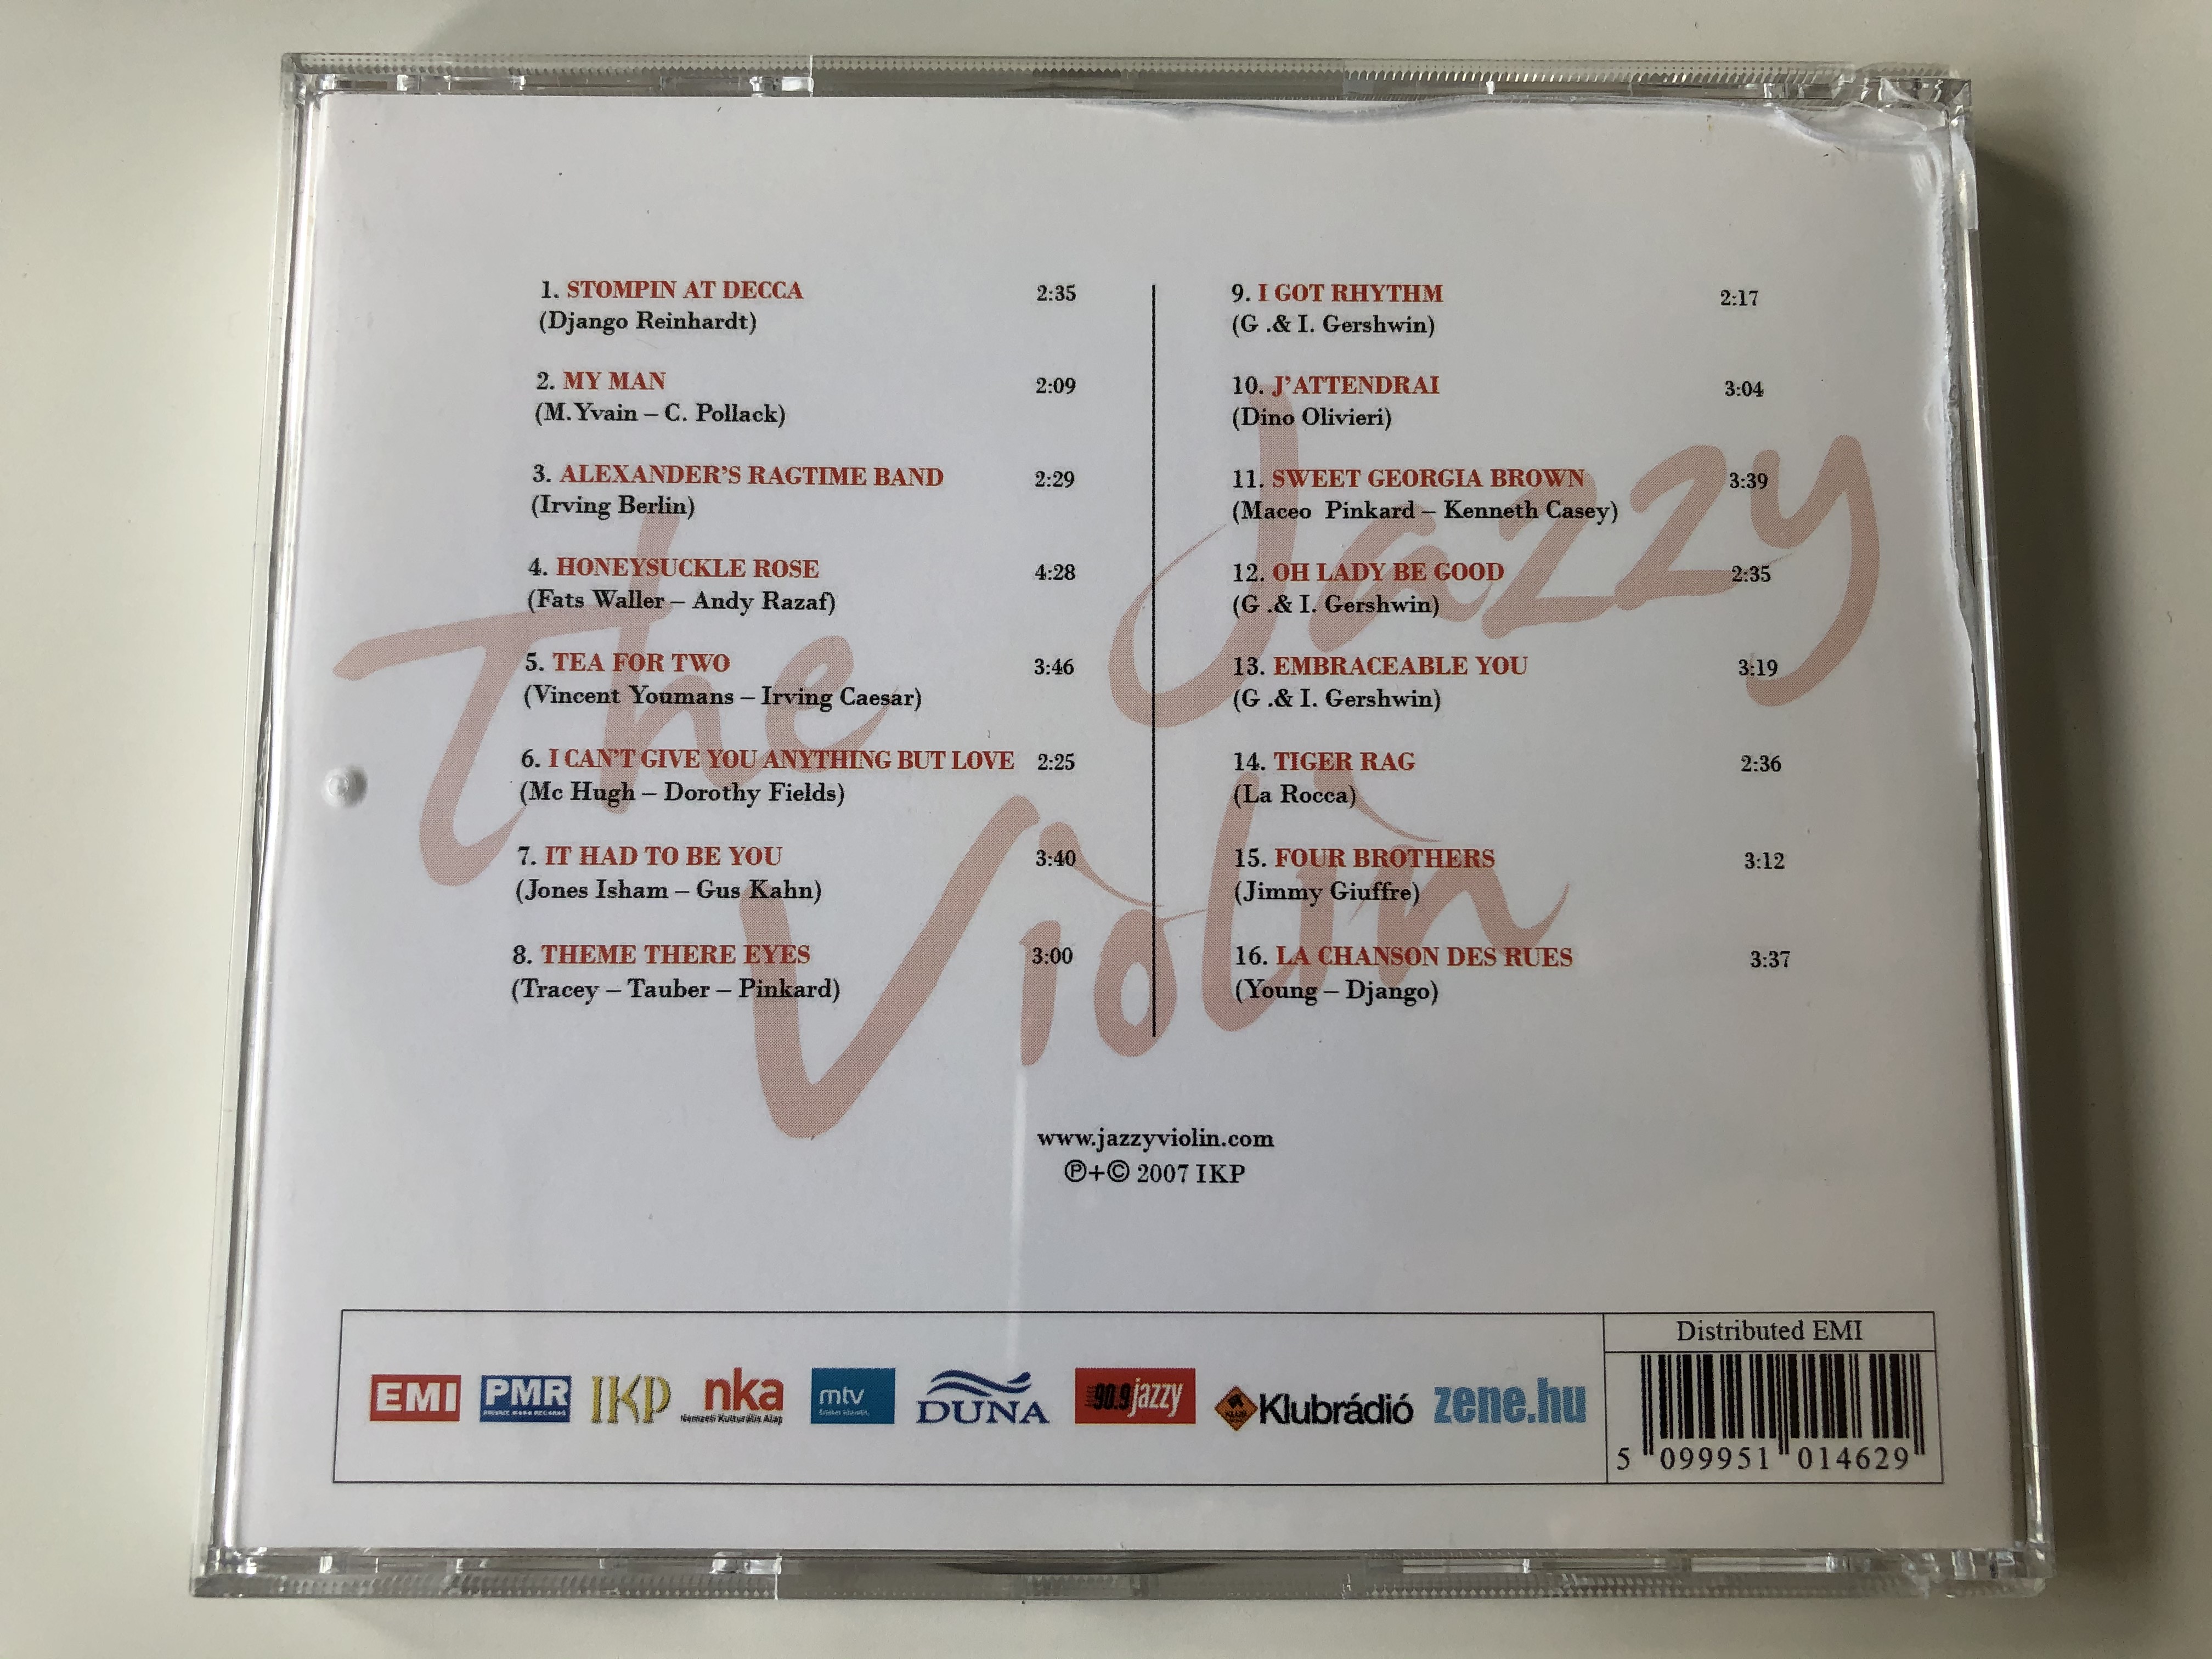 katica-ill-ny-the-jazzy-violin-inspired-by-stephane-grappelli-concerts-compilation-album-ikp-music-audio-cd-2007-510146-2-5-.jpg